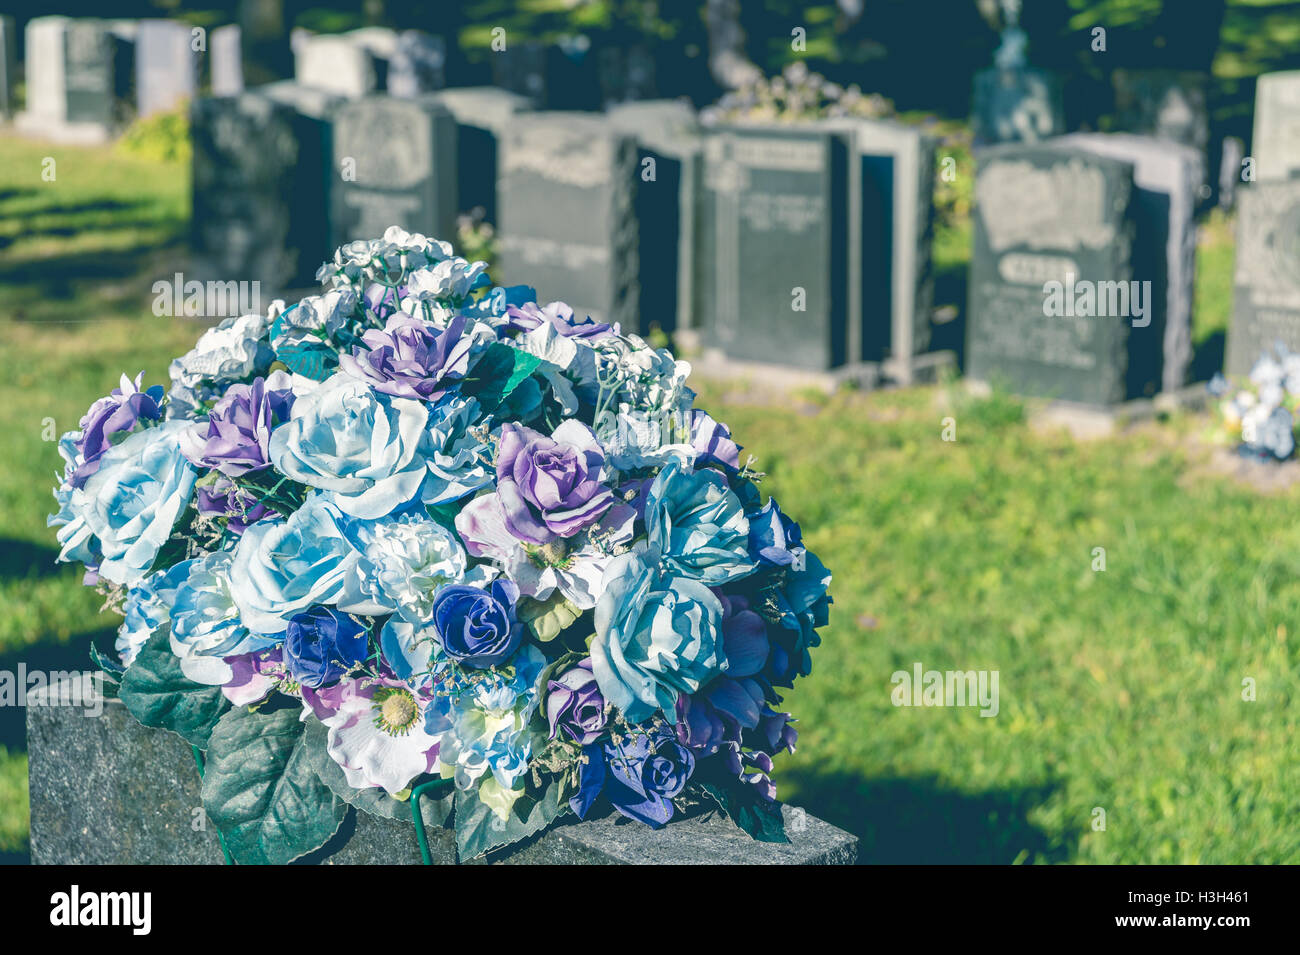 Roses in a cemetery with headstones in the background (faded retro effect) Stock Photo